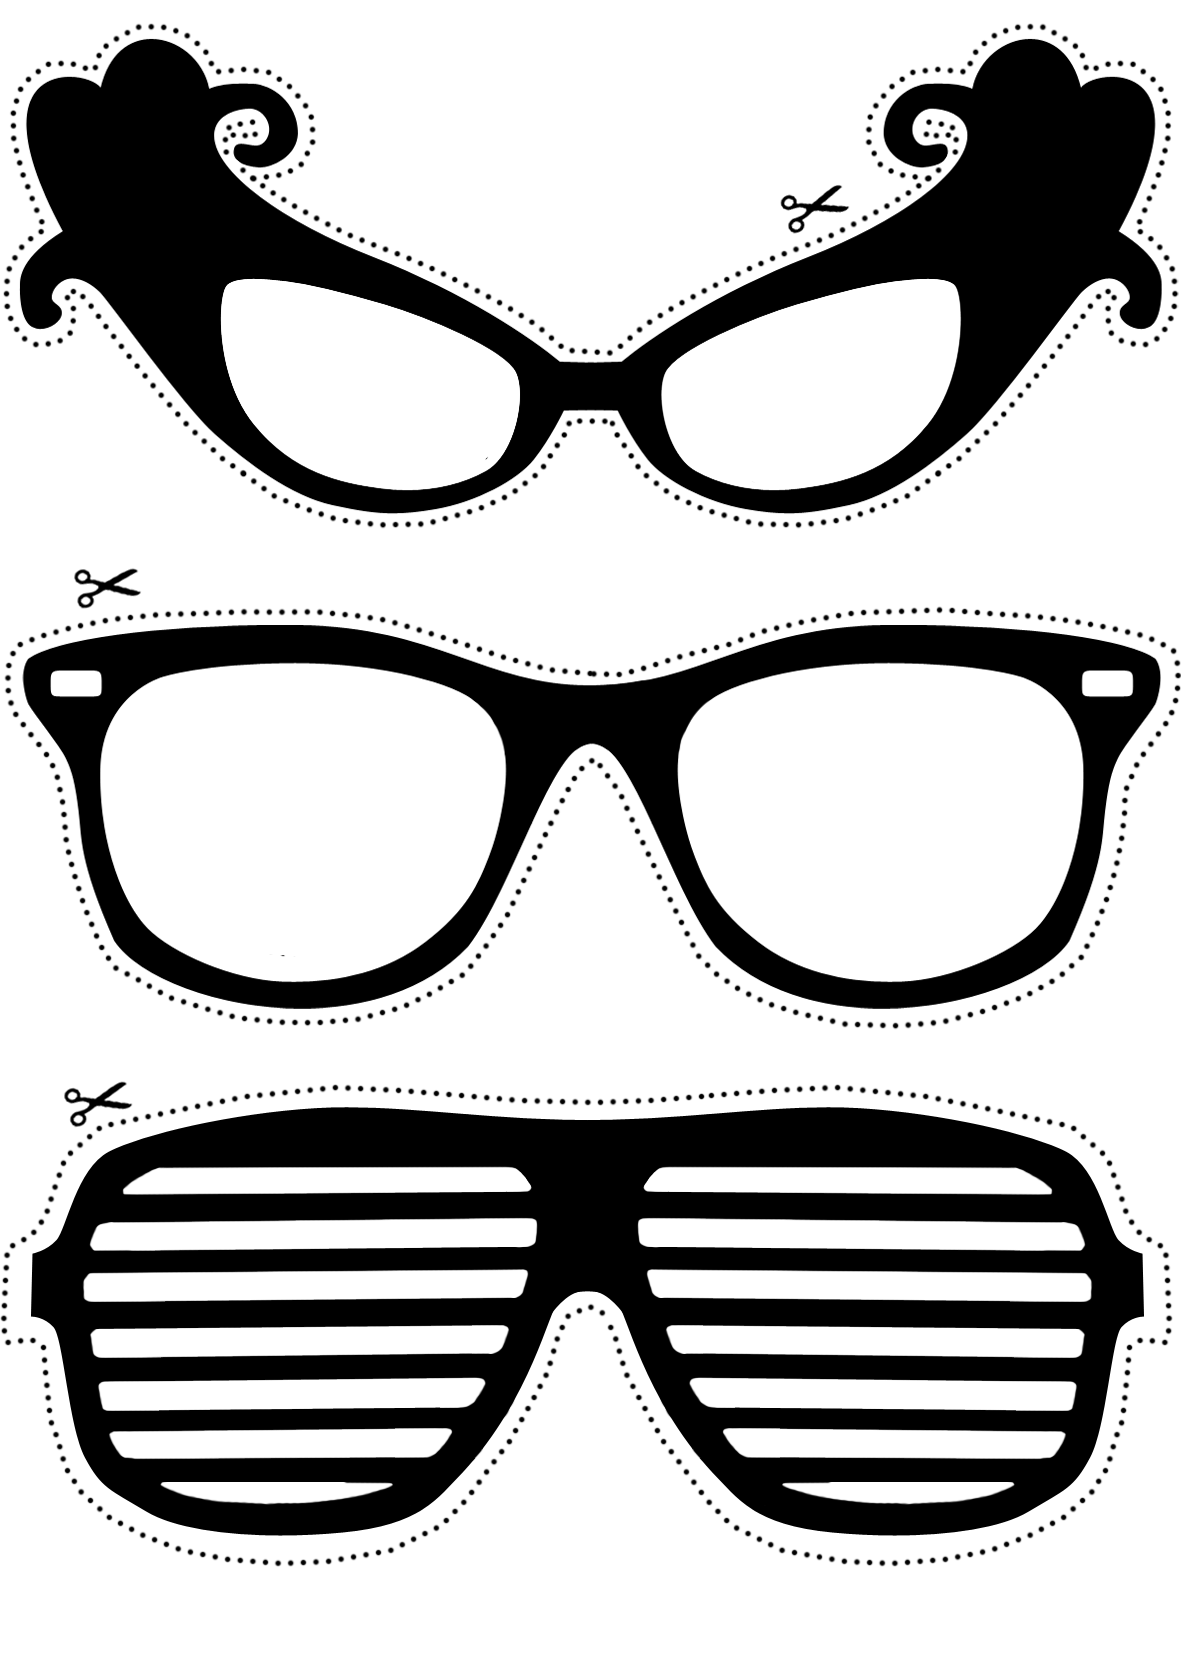 Sunglasses clipart printable. Photo booth props black